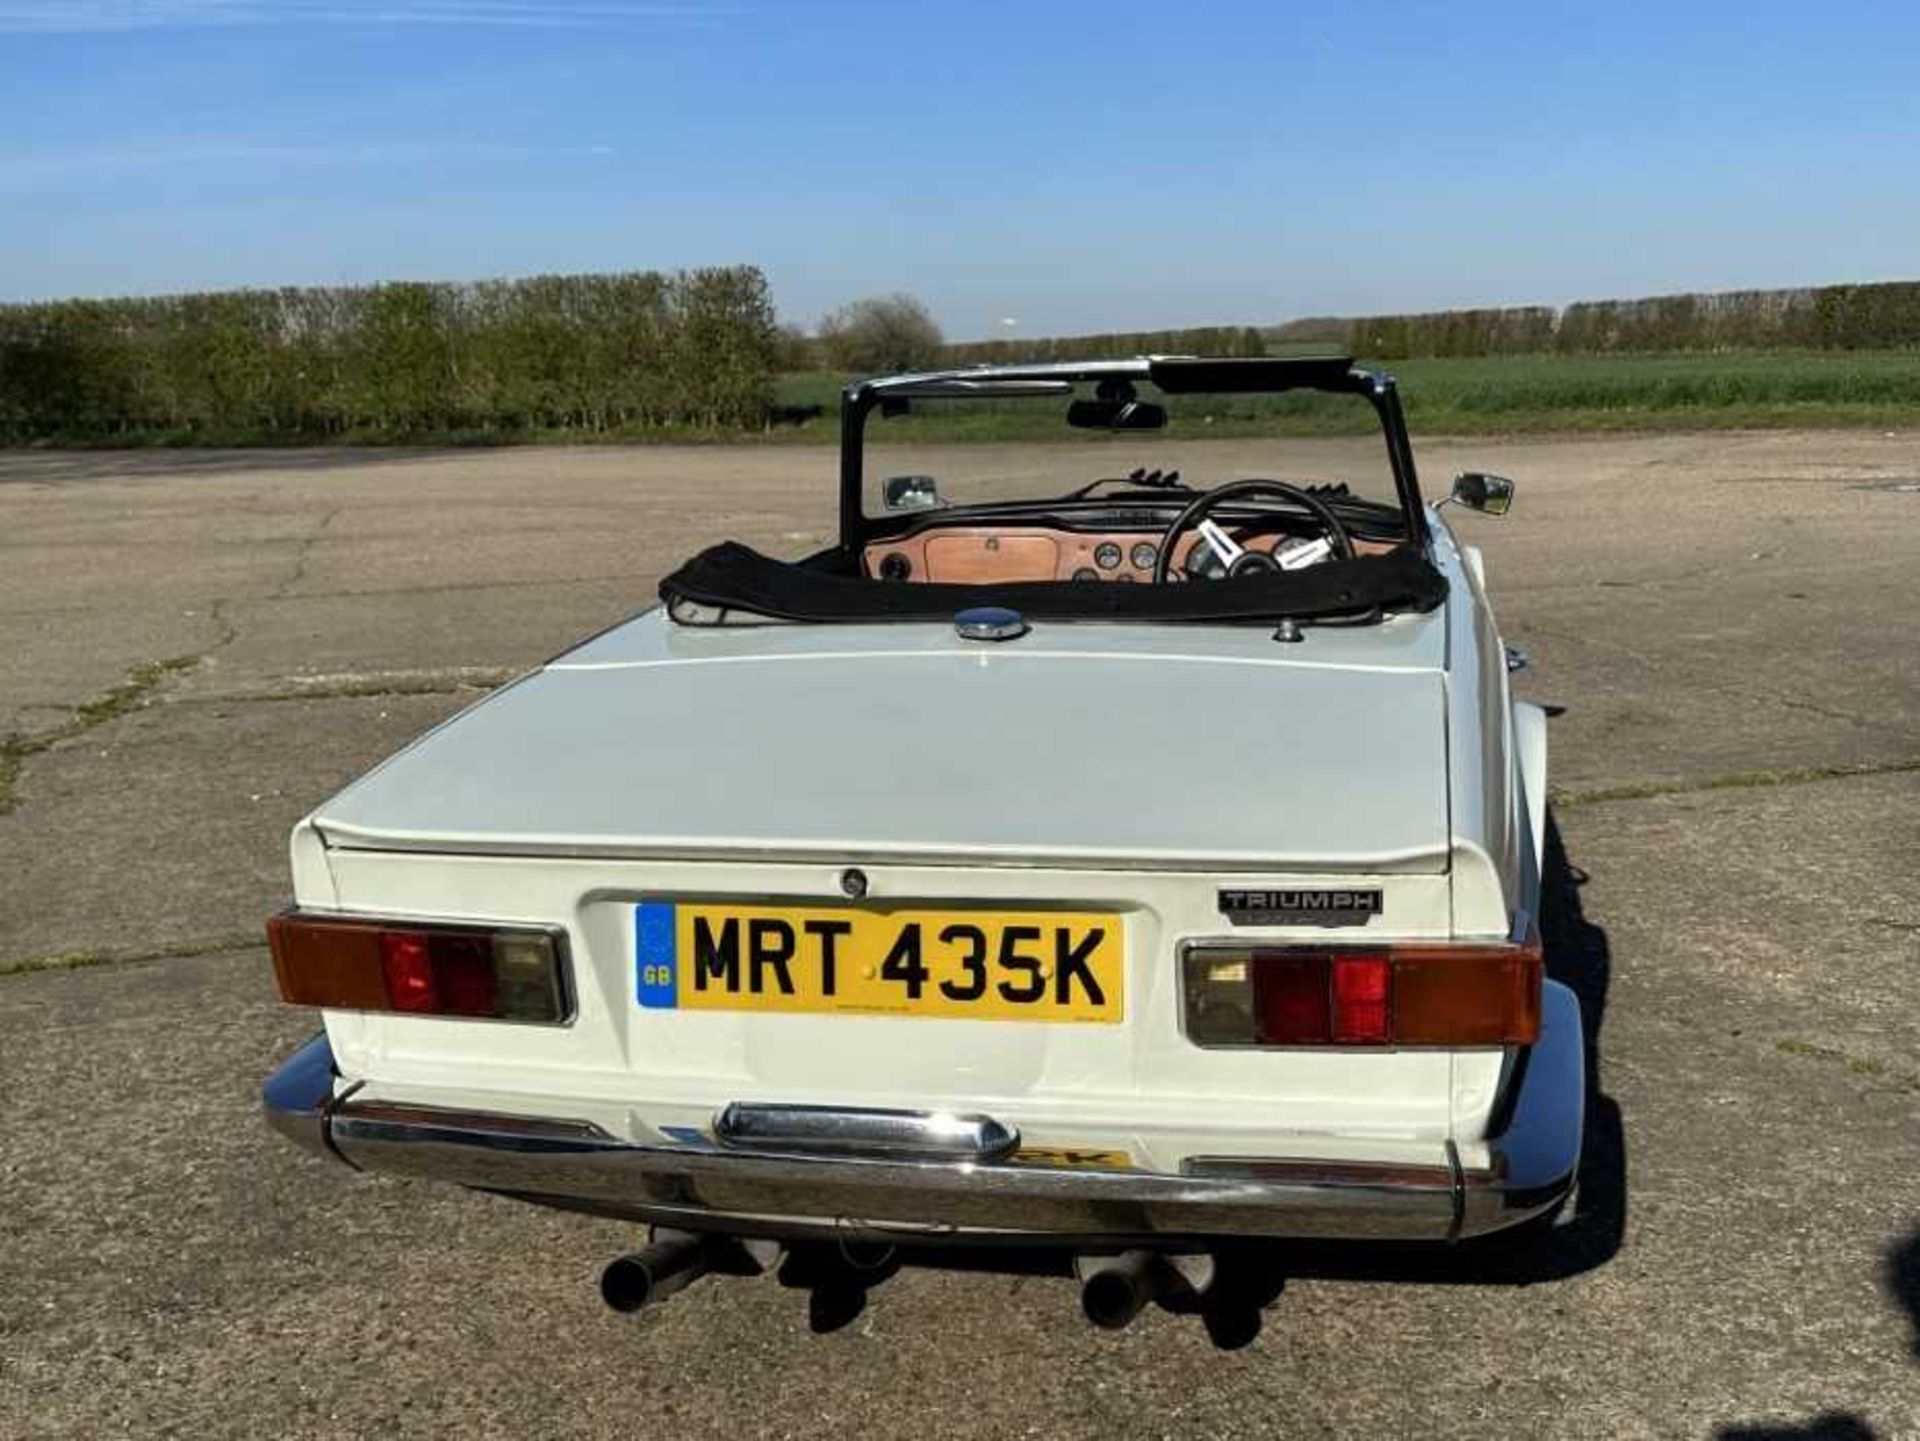 1972 Triumph TR6, 2498cc, manual, chassis number CP542320, reg. no. MRT 435K - Image 13 of 29